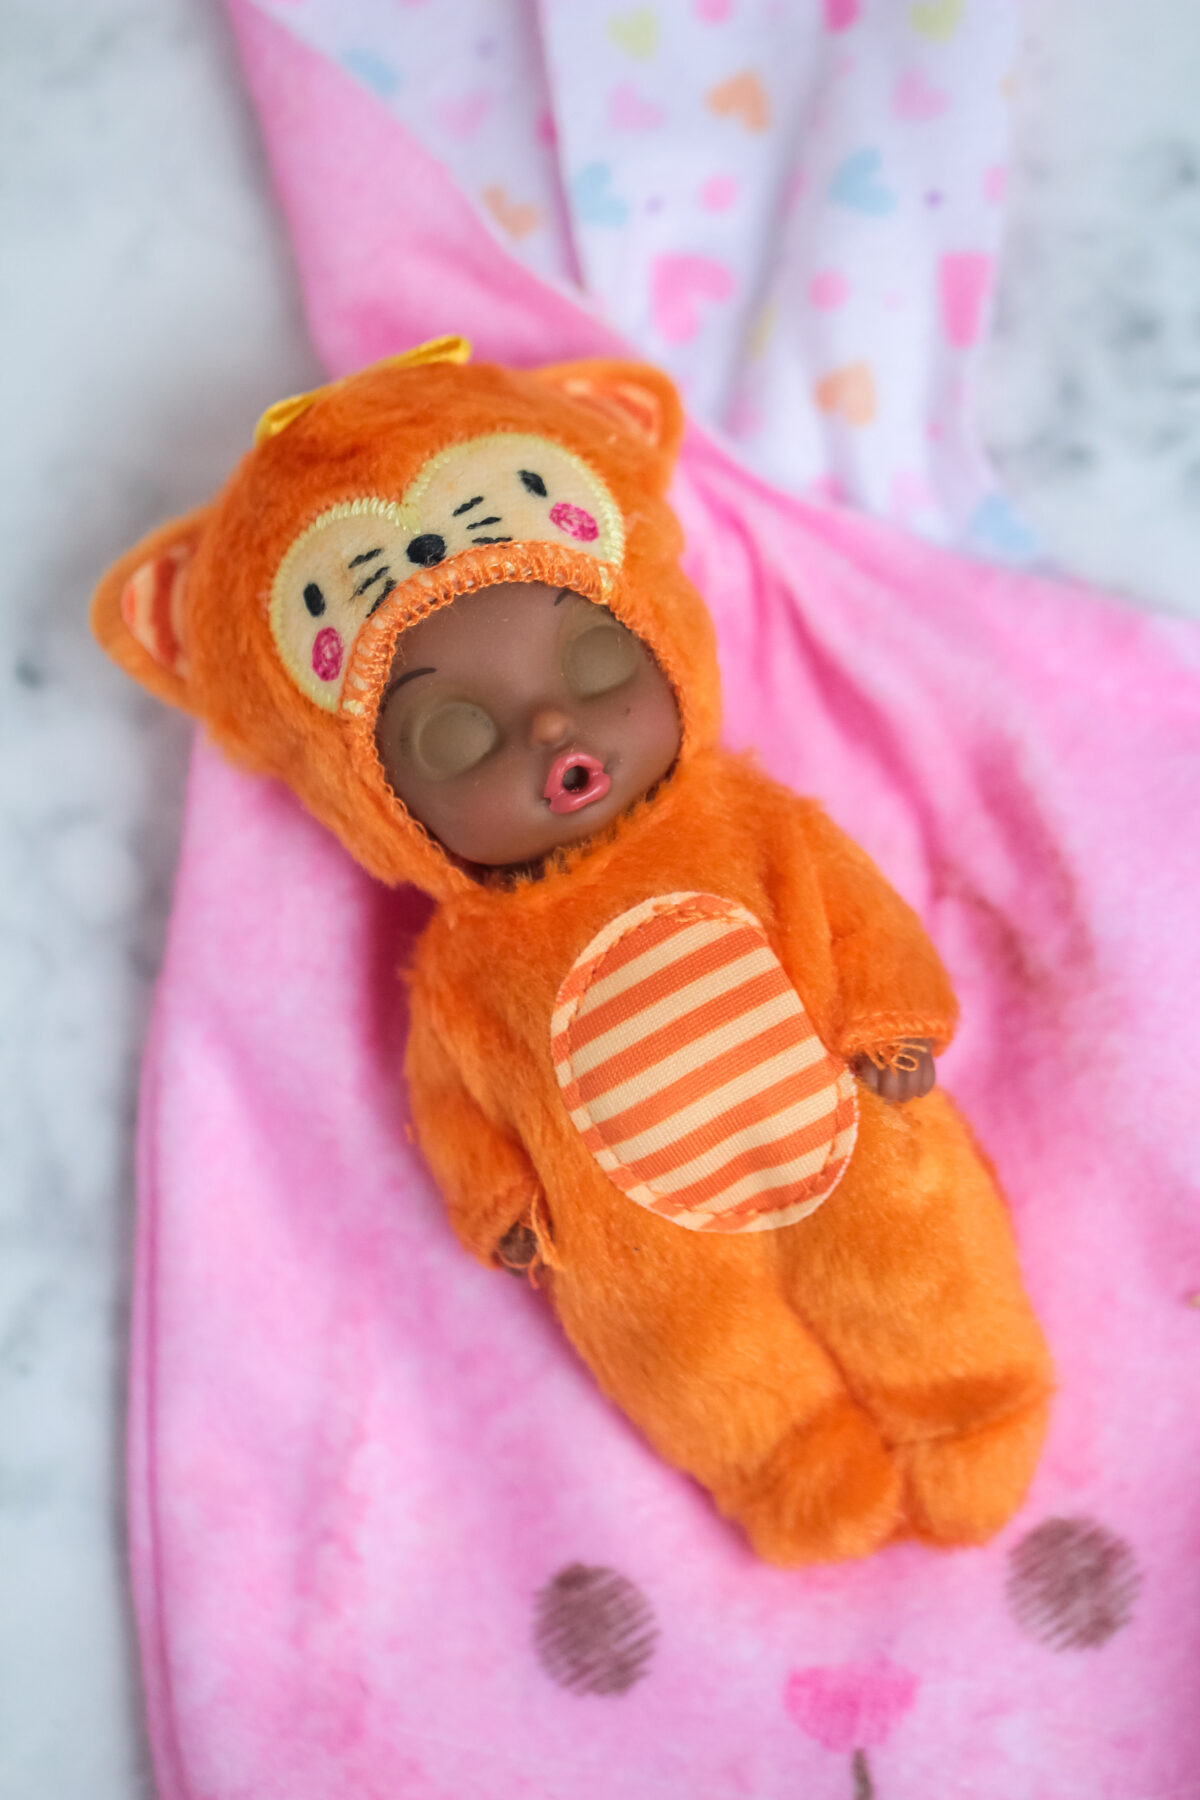 Baby Born Surprise Animal Babies are collectible baby dolls wearing soft and cozy themed onesies that come hidden inside a soft bunny pouch.